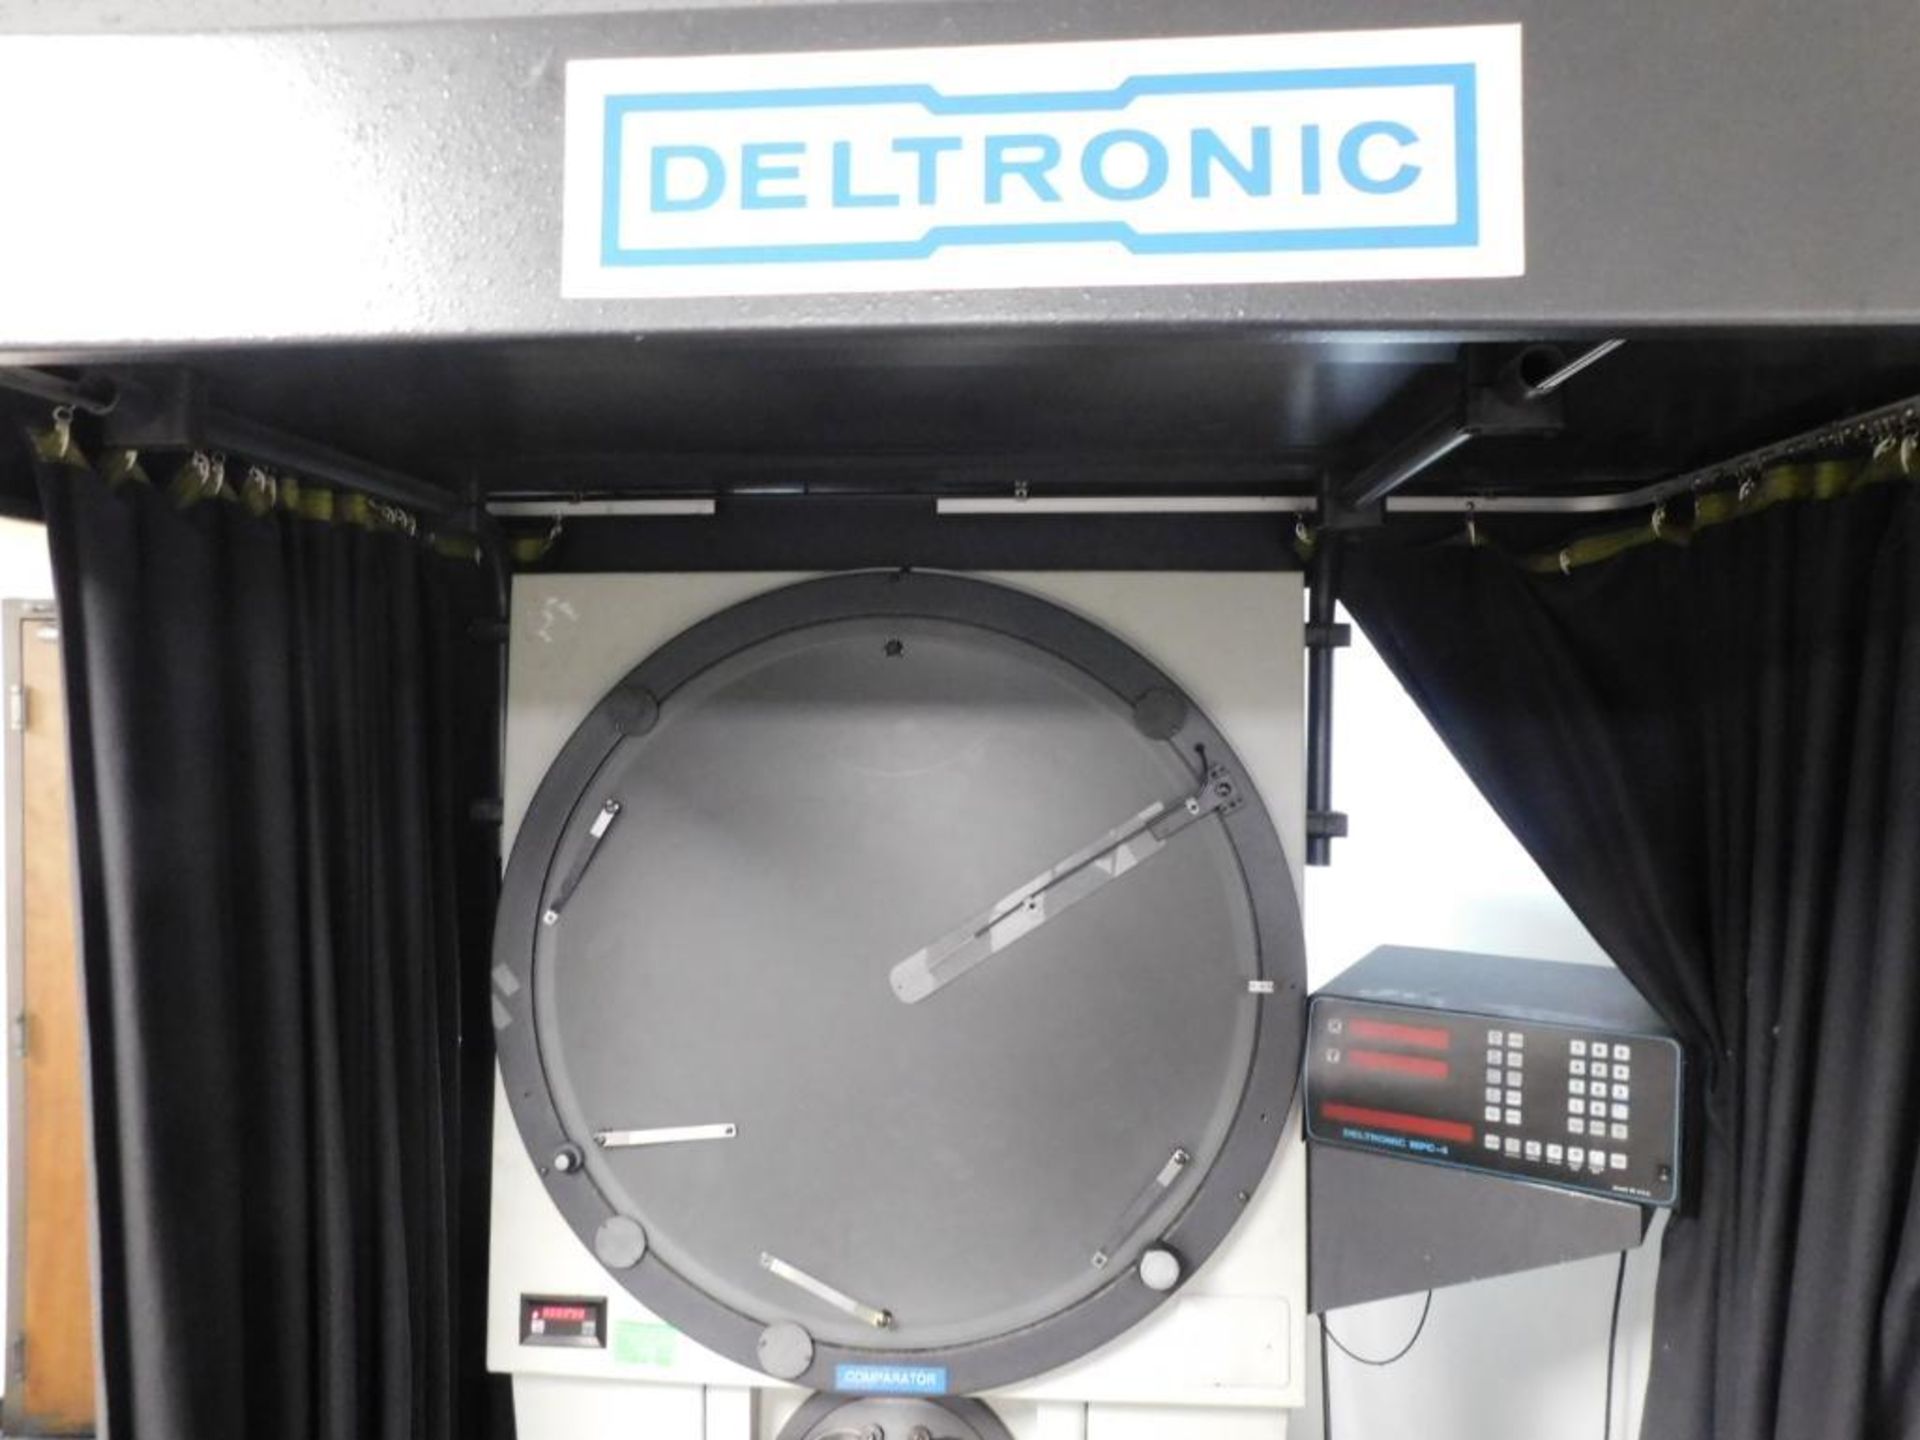 Deltronic Optical Comparator Model DH30-MPC 4ECNC, 30" Screen Deltronic MPC4, 2-Axis DRO Joystick, S - Image 10 of 10